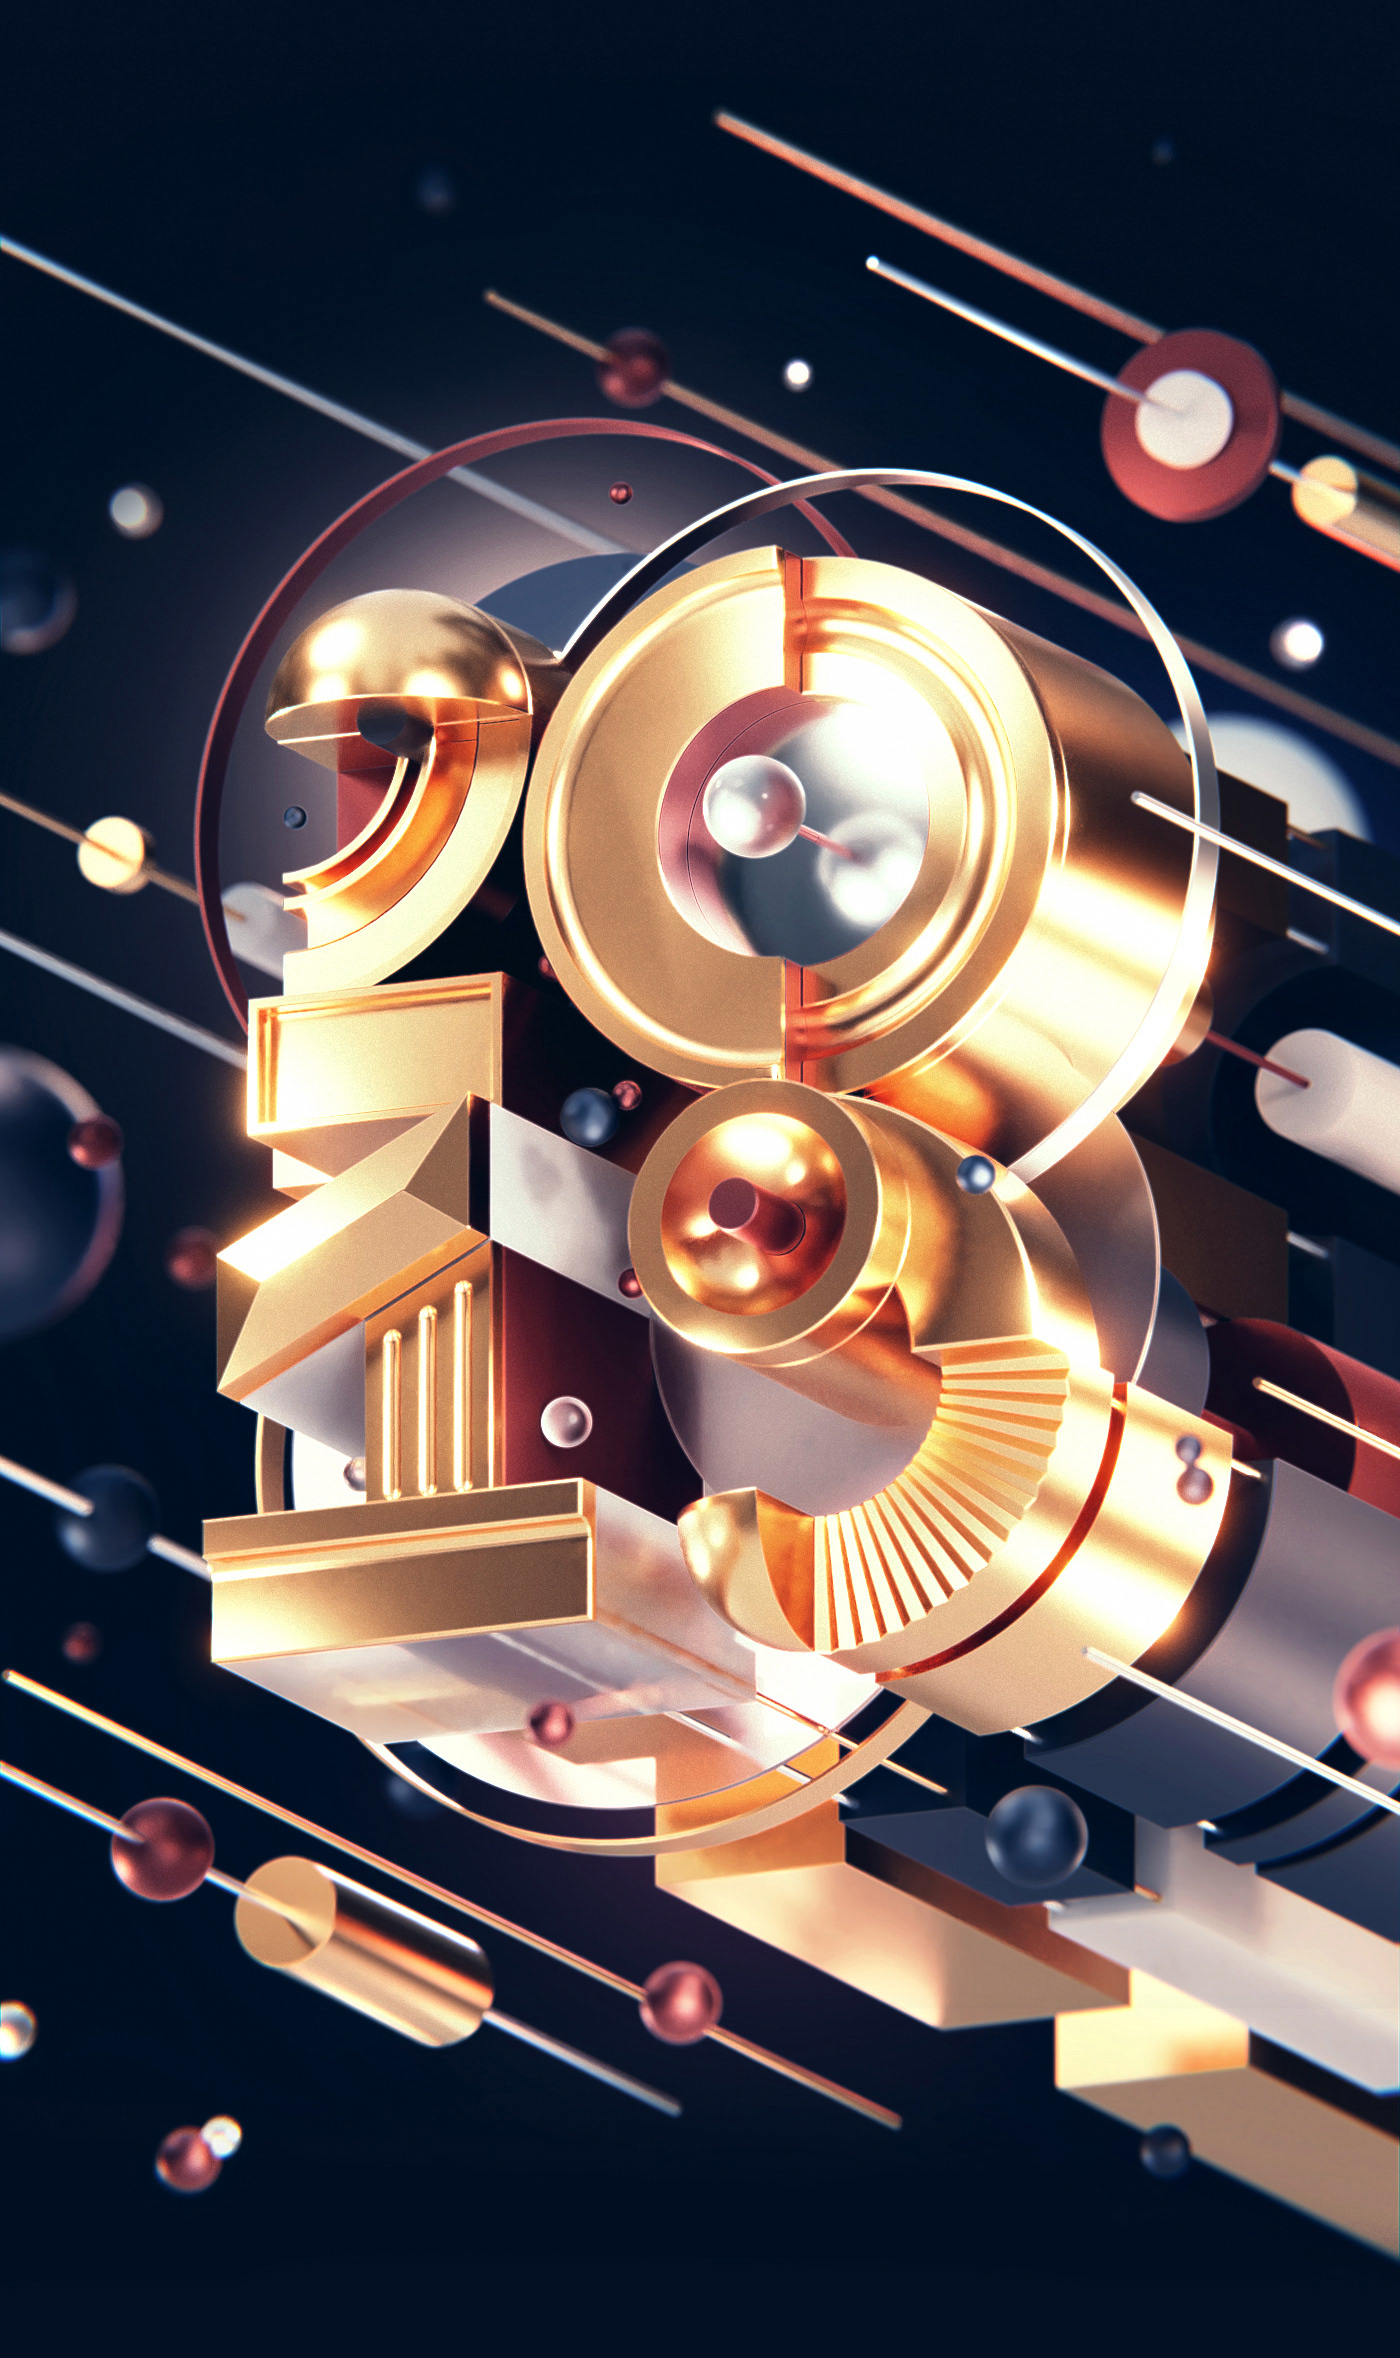 3D typography   xmas Christmas newyear explorations numbers lettering CGI abstract